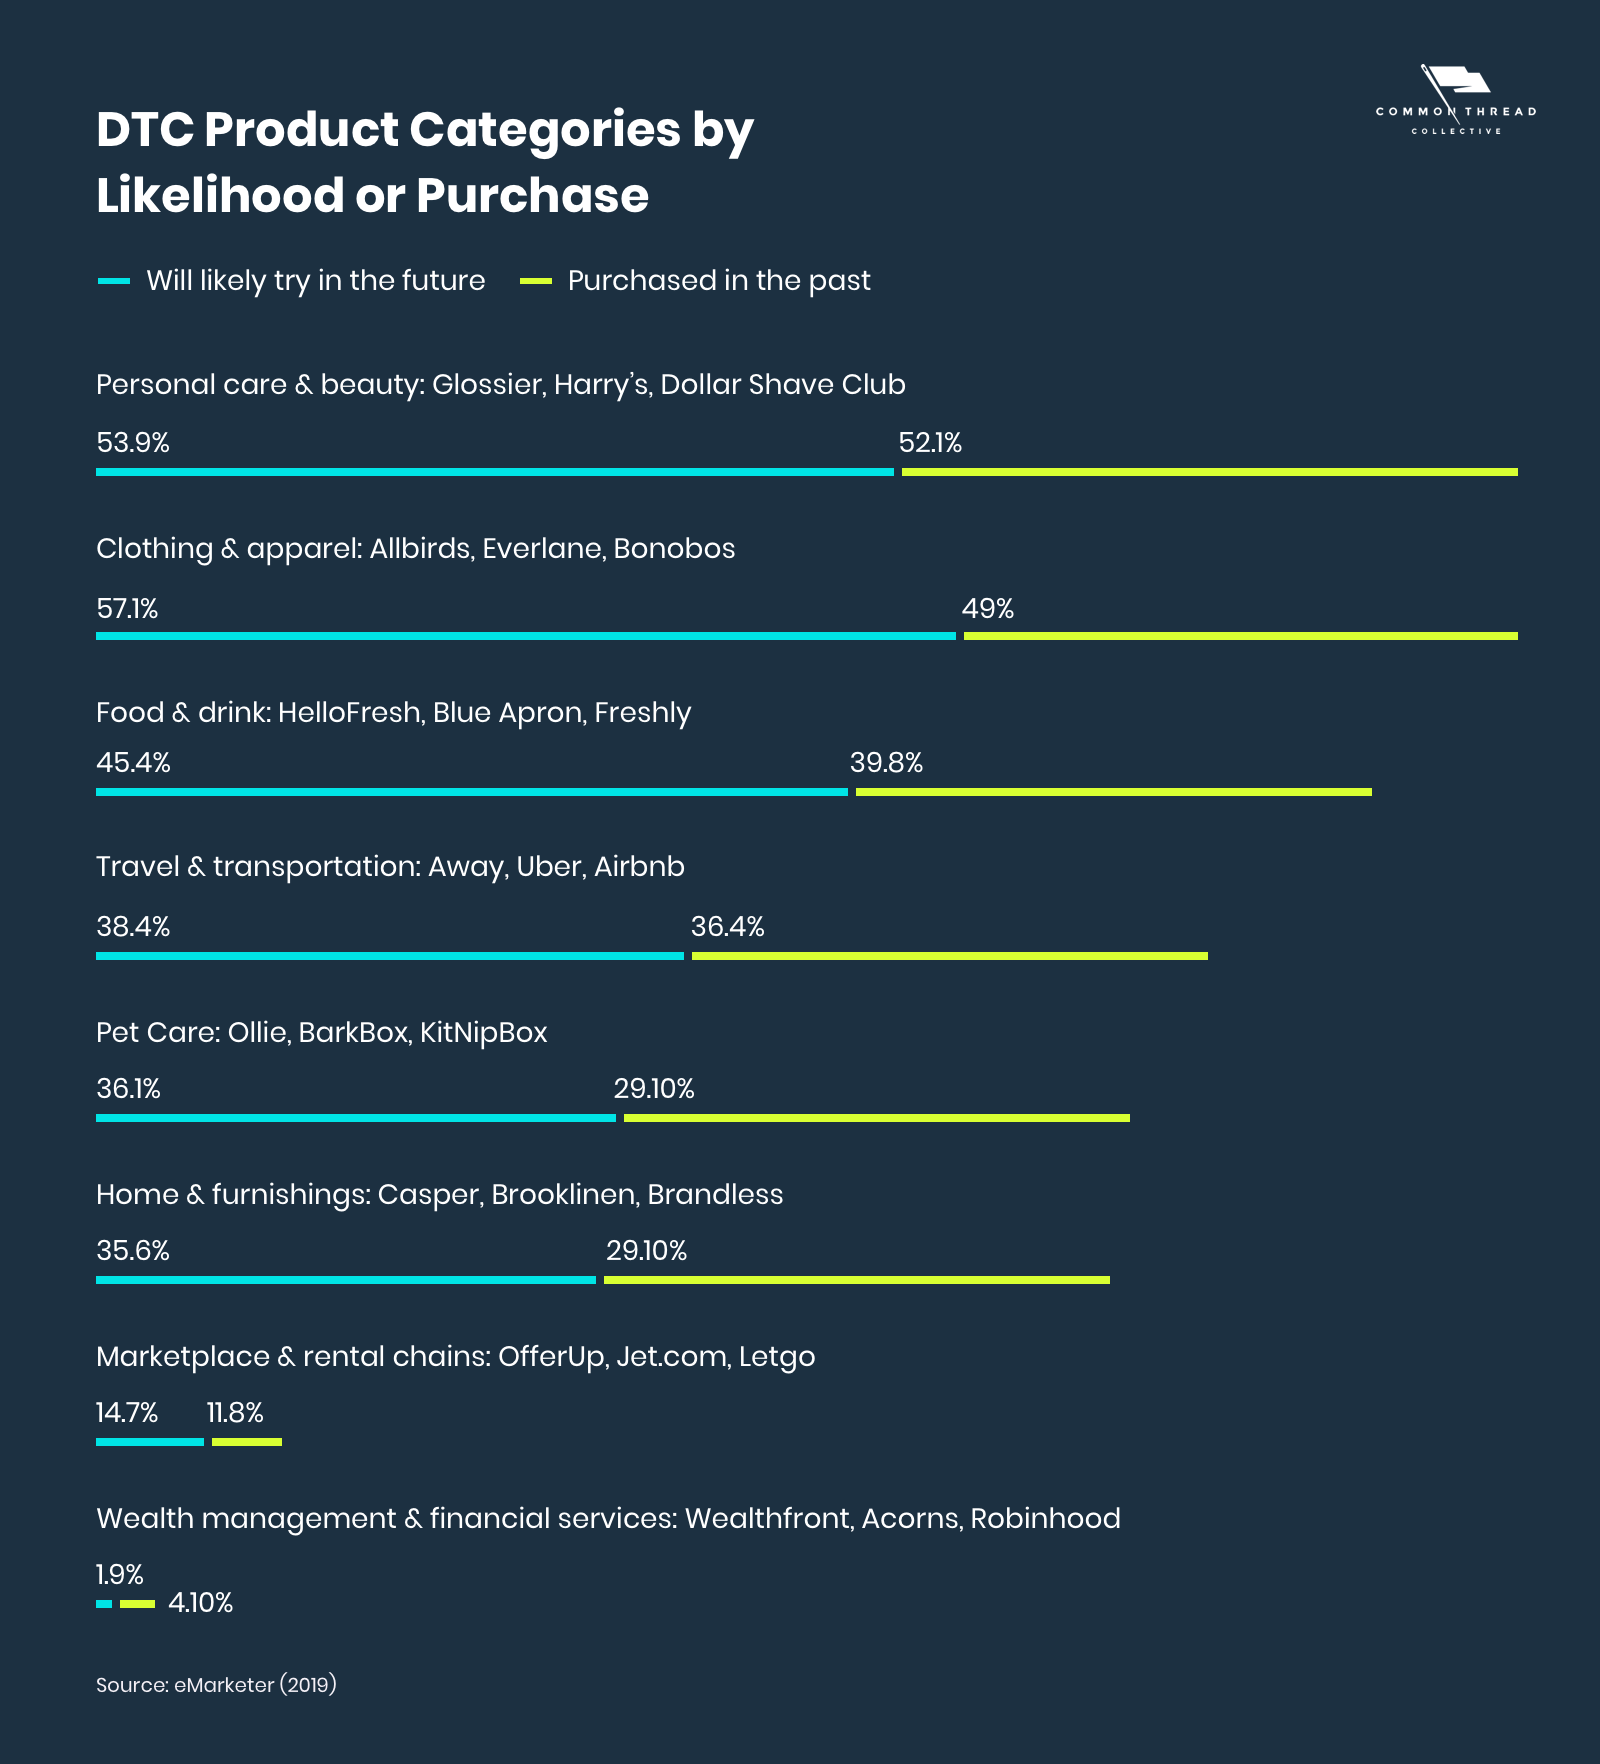 DTC Product Categories by Likelihood or Purchase